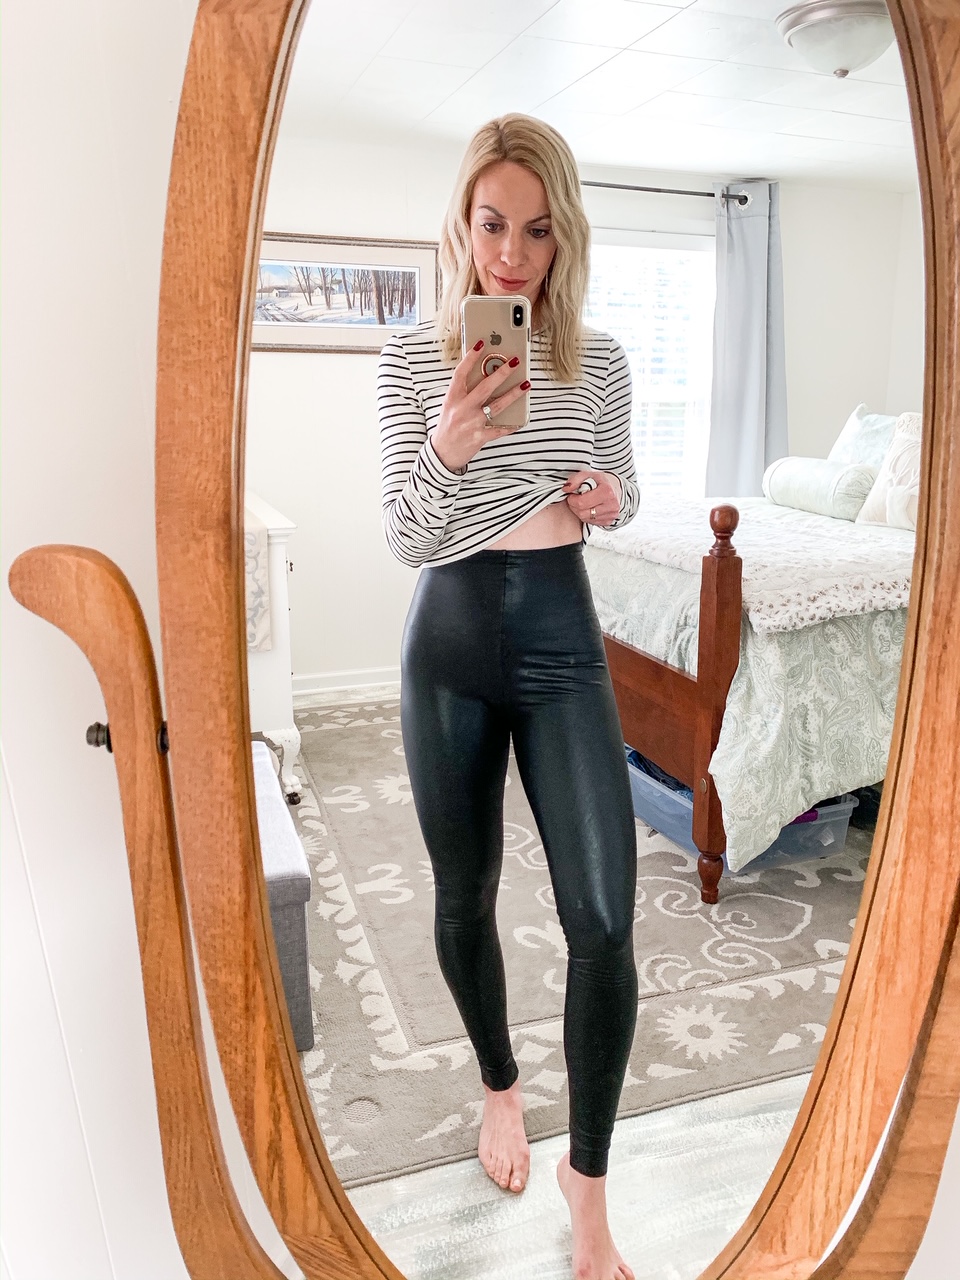 Commando versus Spanx Faux Leather Leggings: Which Pair is Best